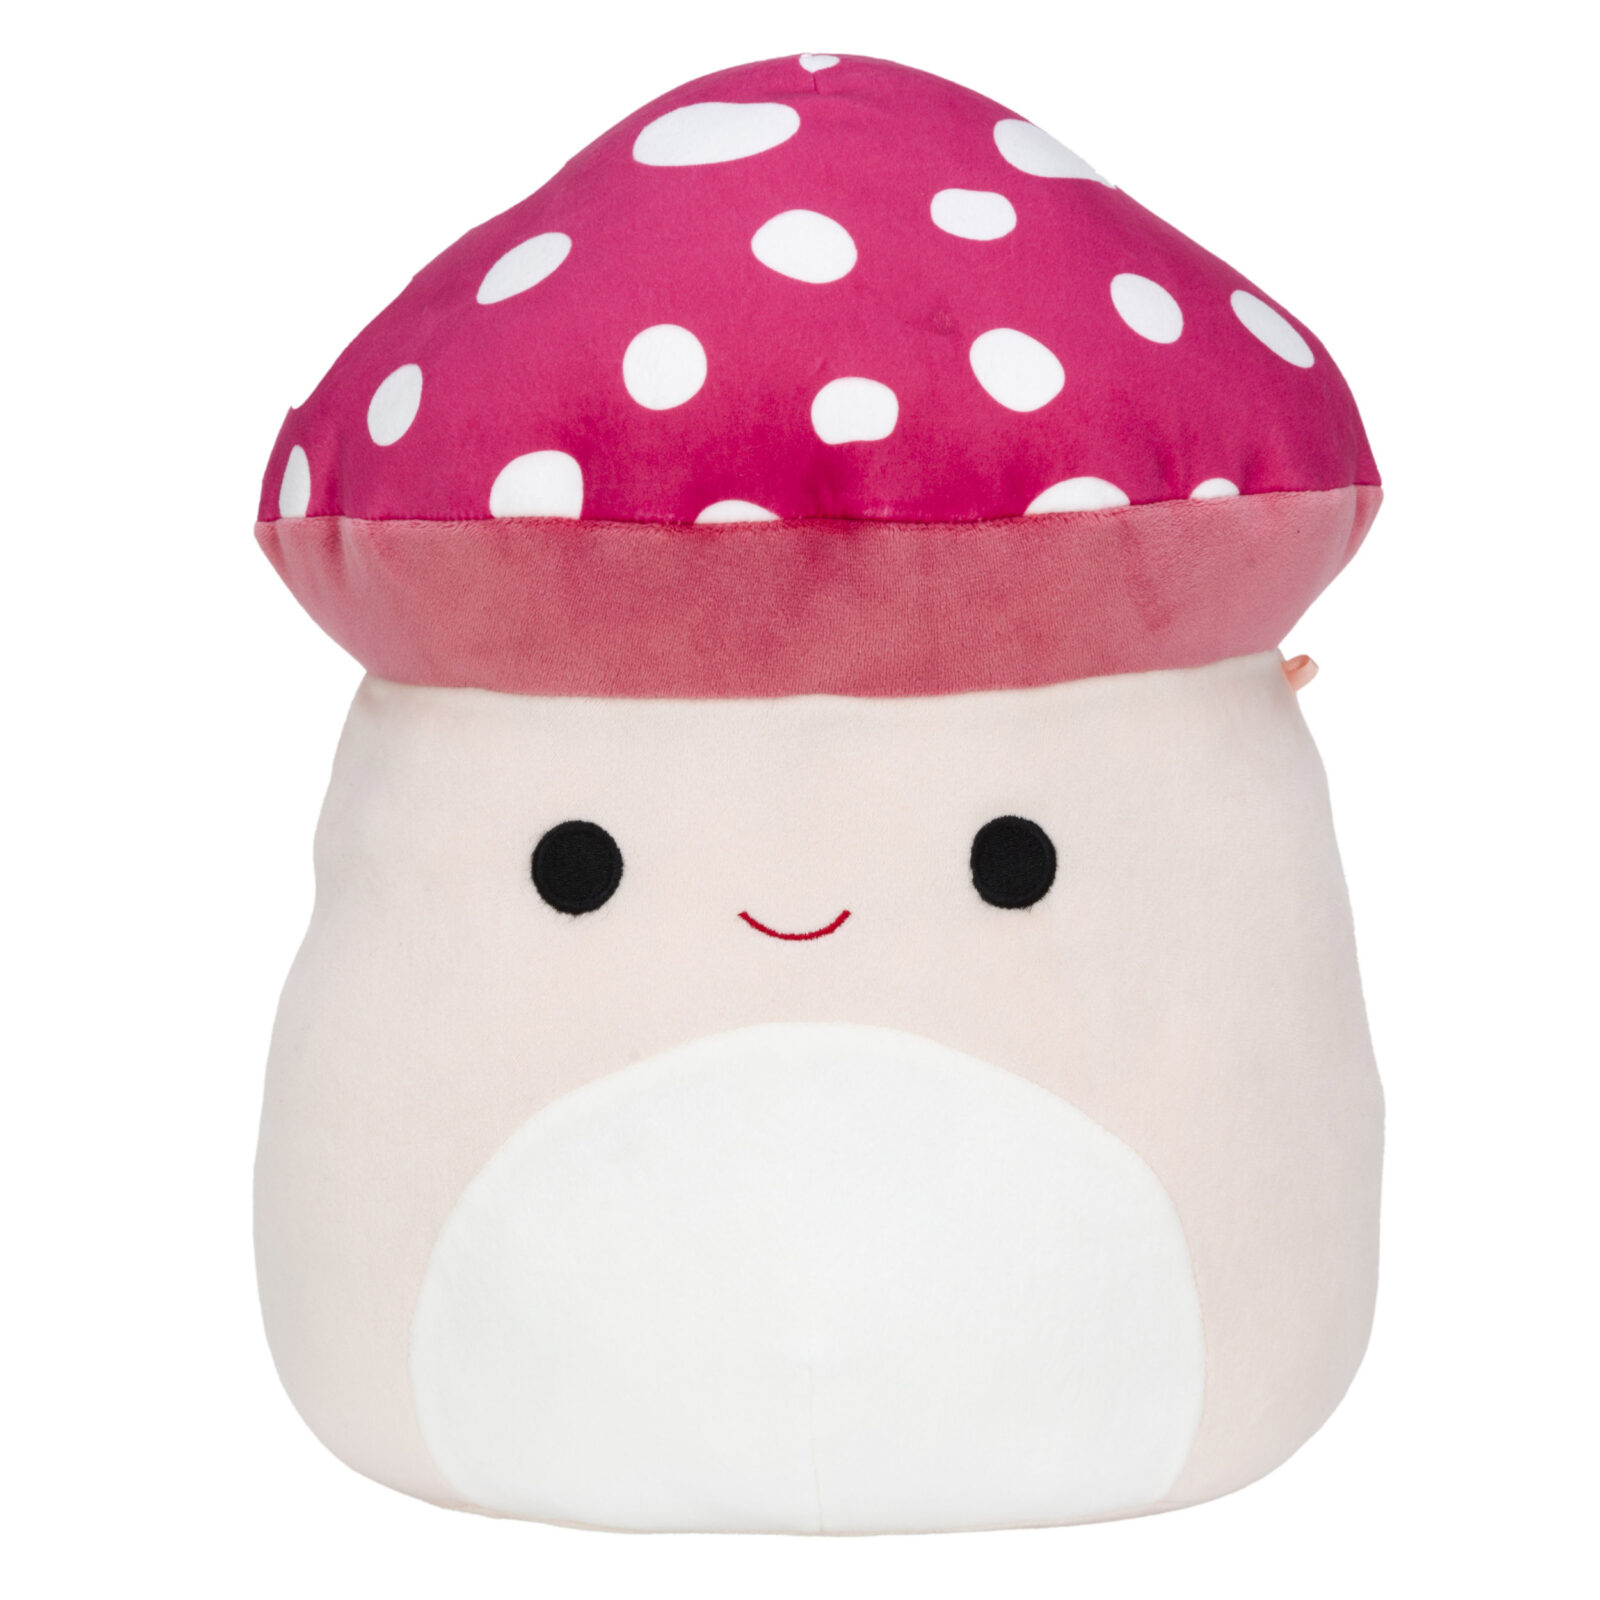 40 New Squishmallows Are Joining the Snuggly Line